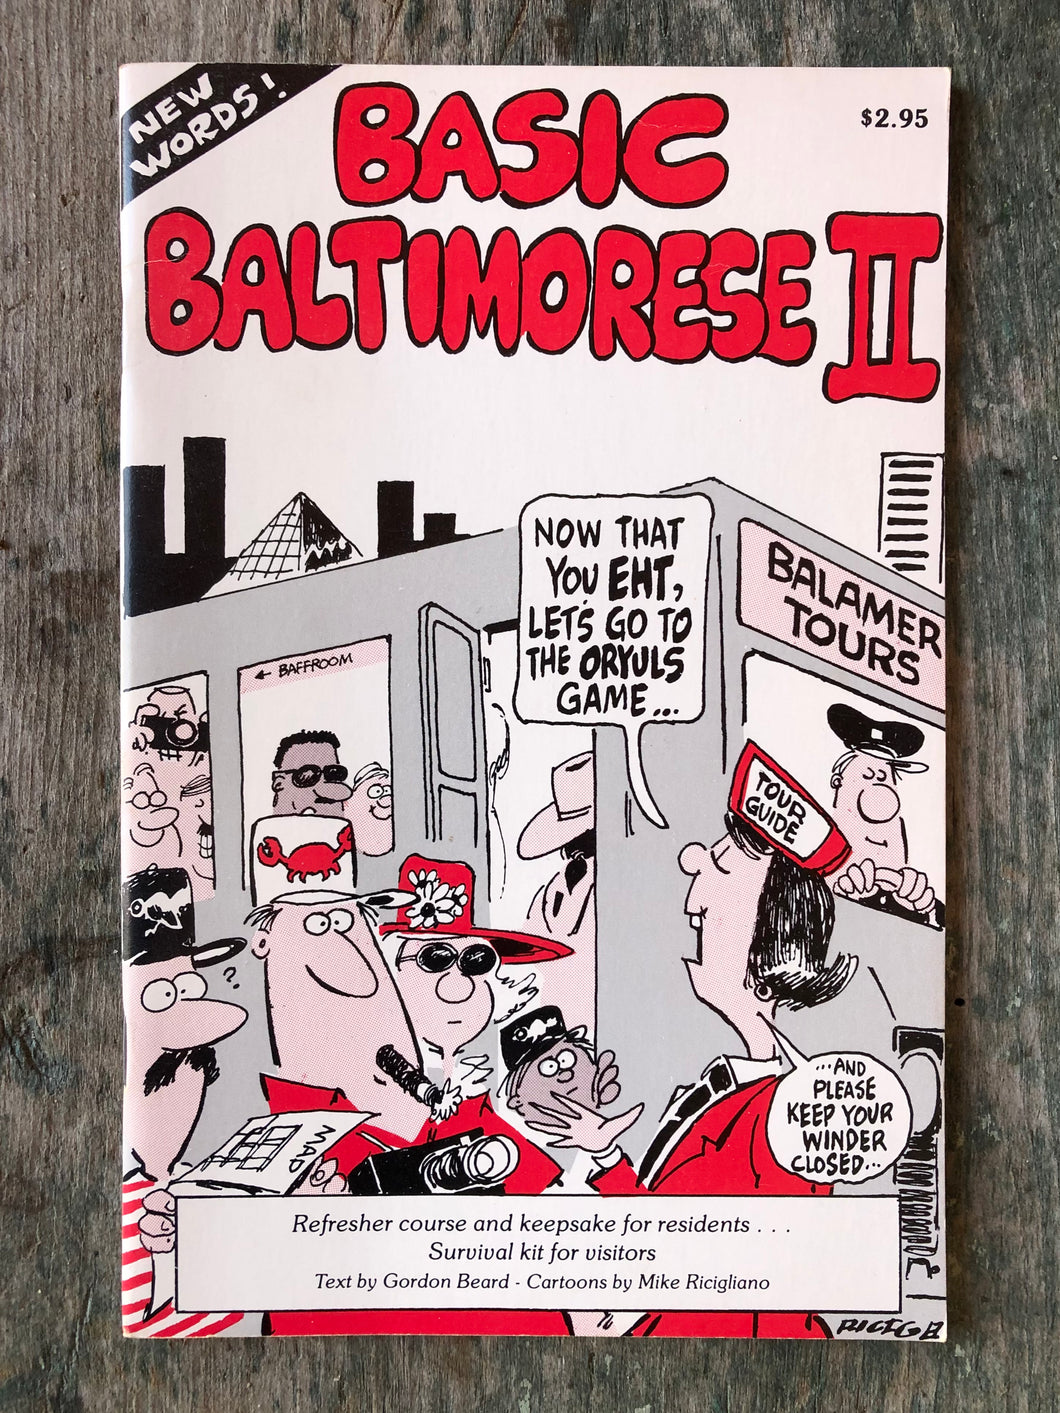 Basic Baltimorese II: An Illustrated Guide For Getting Around in Balamer, Murlin. Text by Gordon Beard, cartoons by Mike Ricigliano